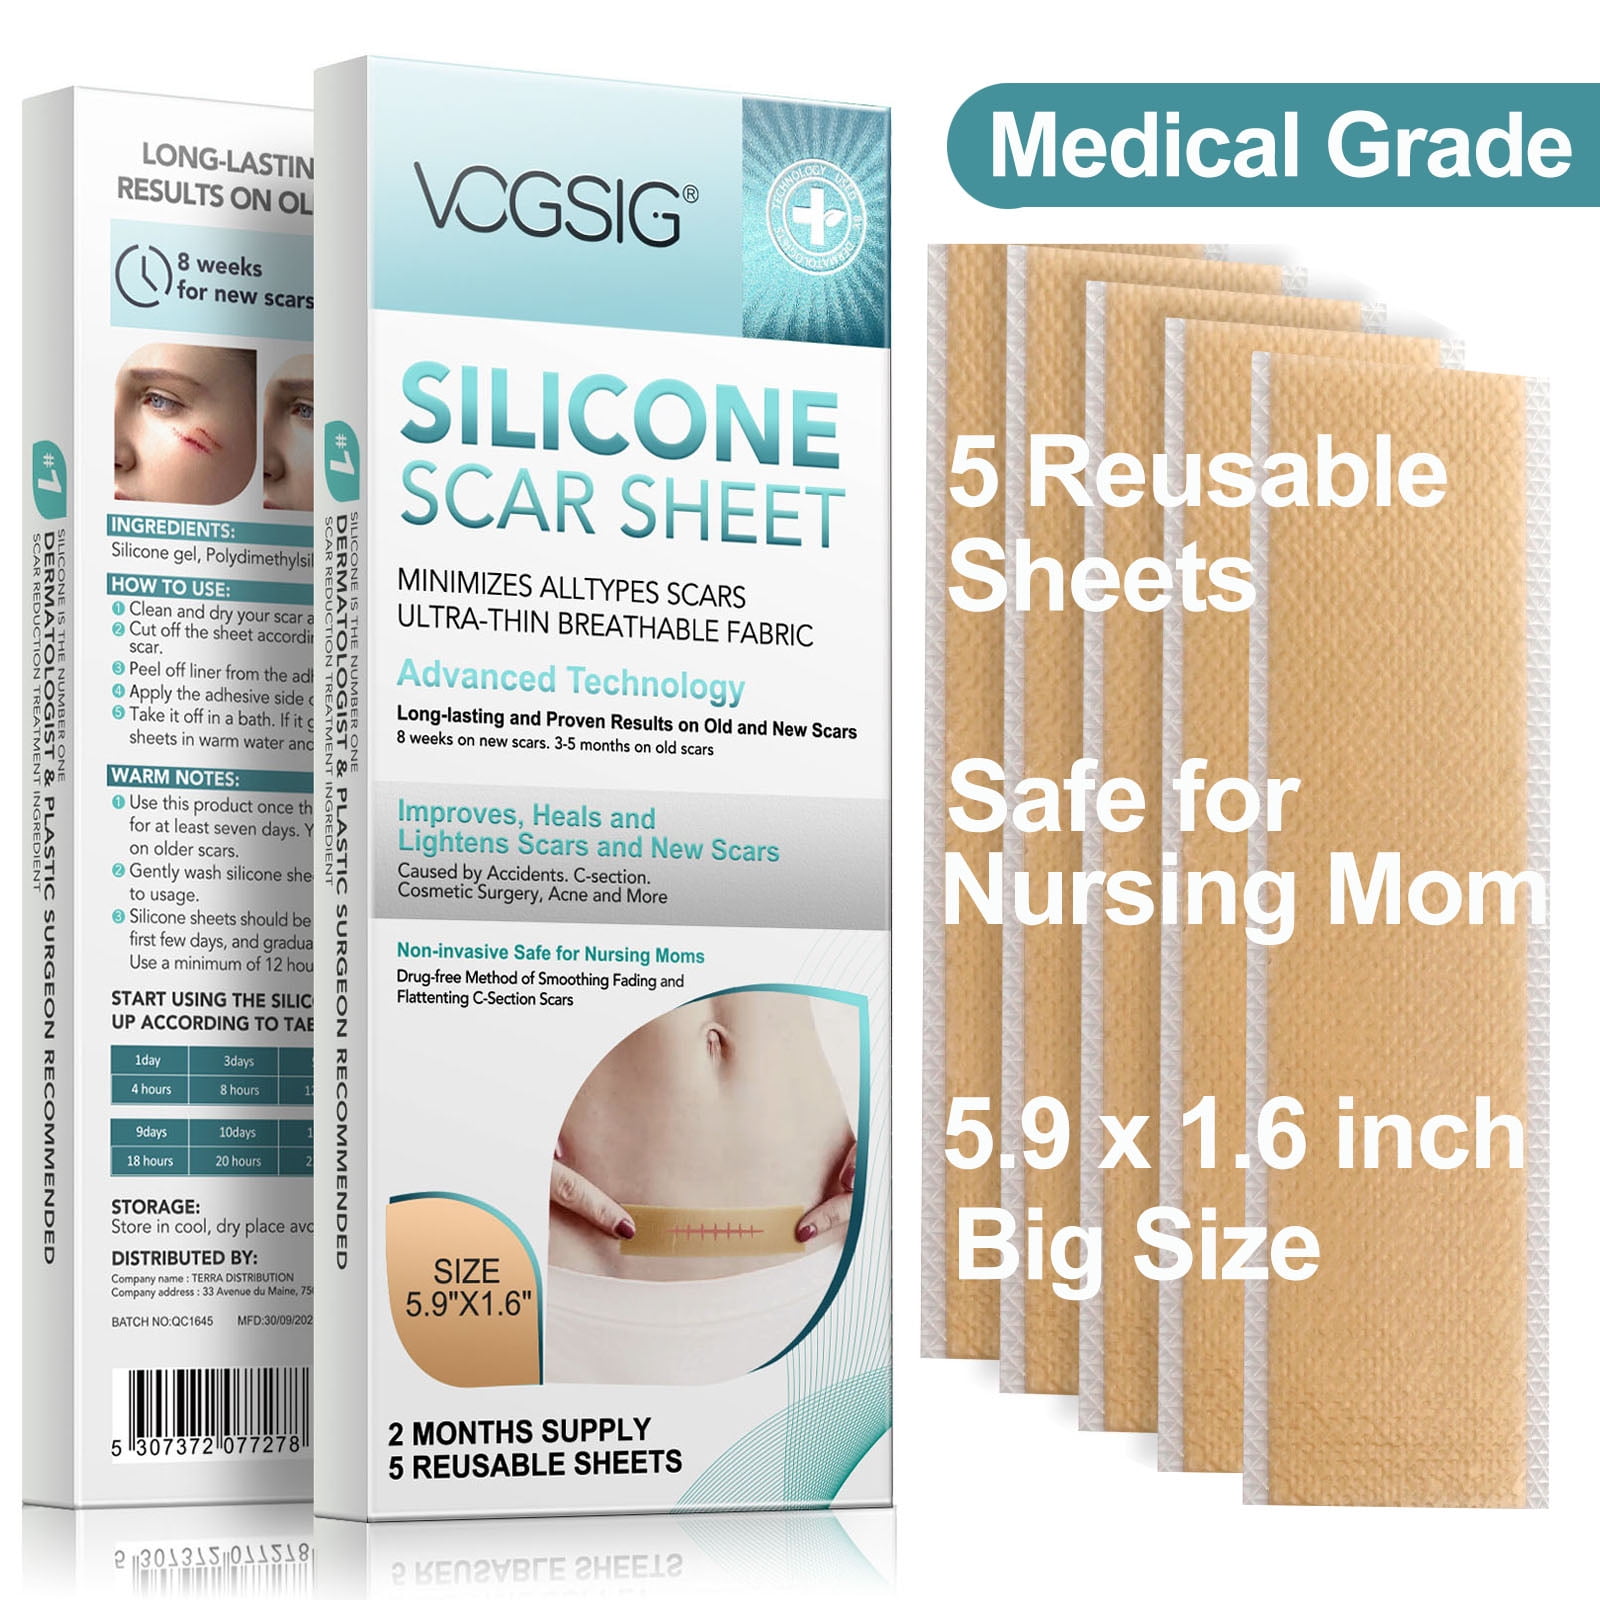 Vogsig 4PCS Medical Silicone Scar Sheets 3x1.6inch Reusable for 2 Months,  Reduce Scar for Surgery,Burn,Acne,C-Section